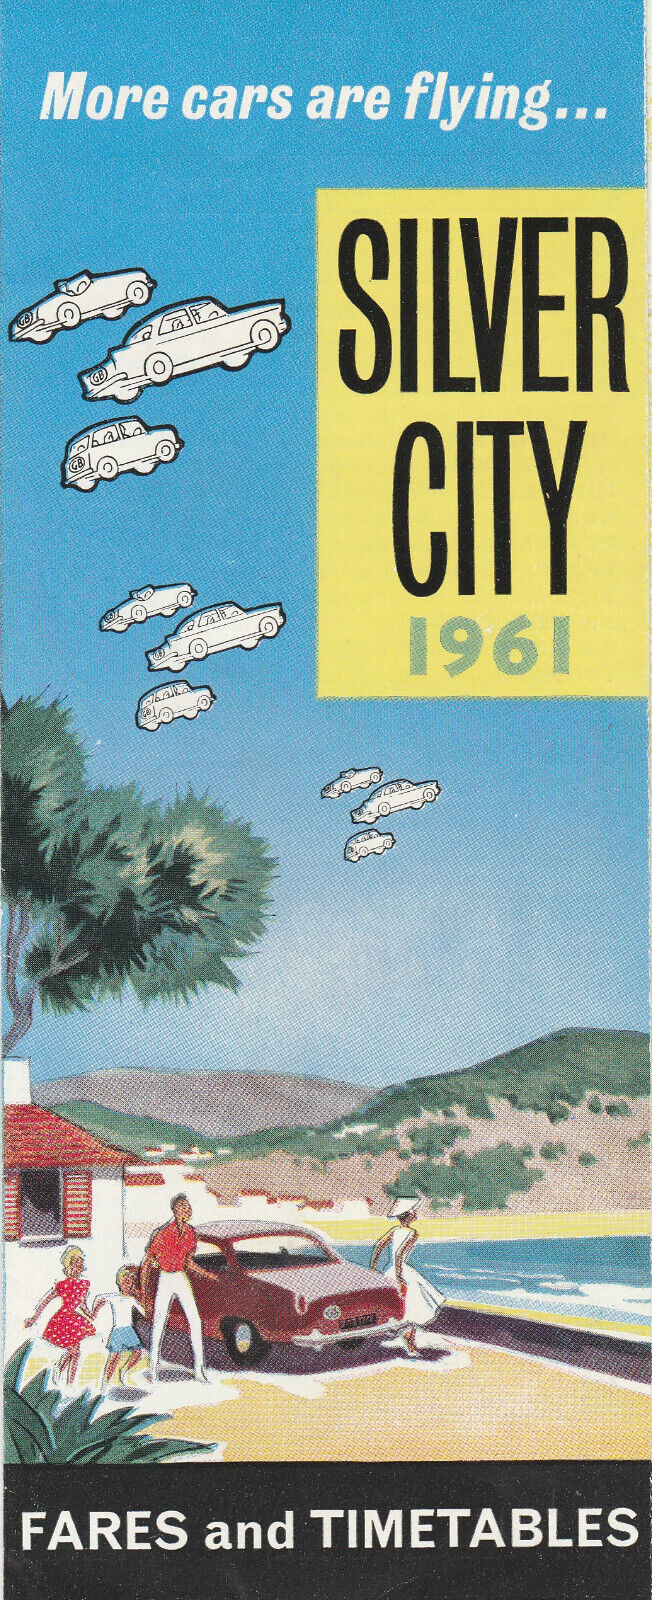 Silver City Airways UK airline car ferry fares and flight schedule 1961